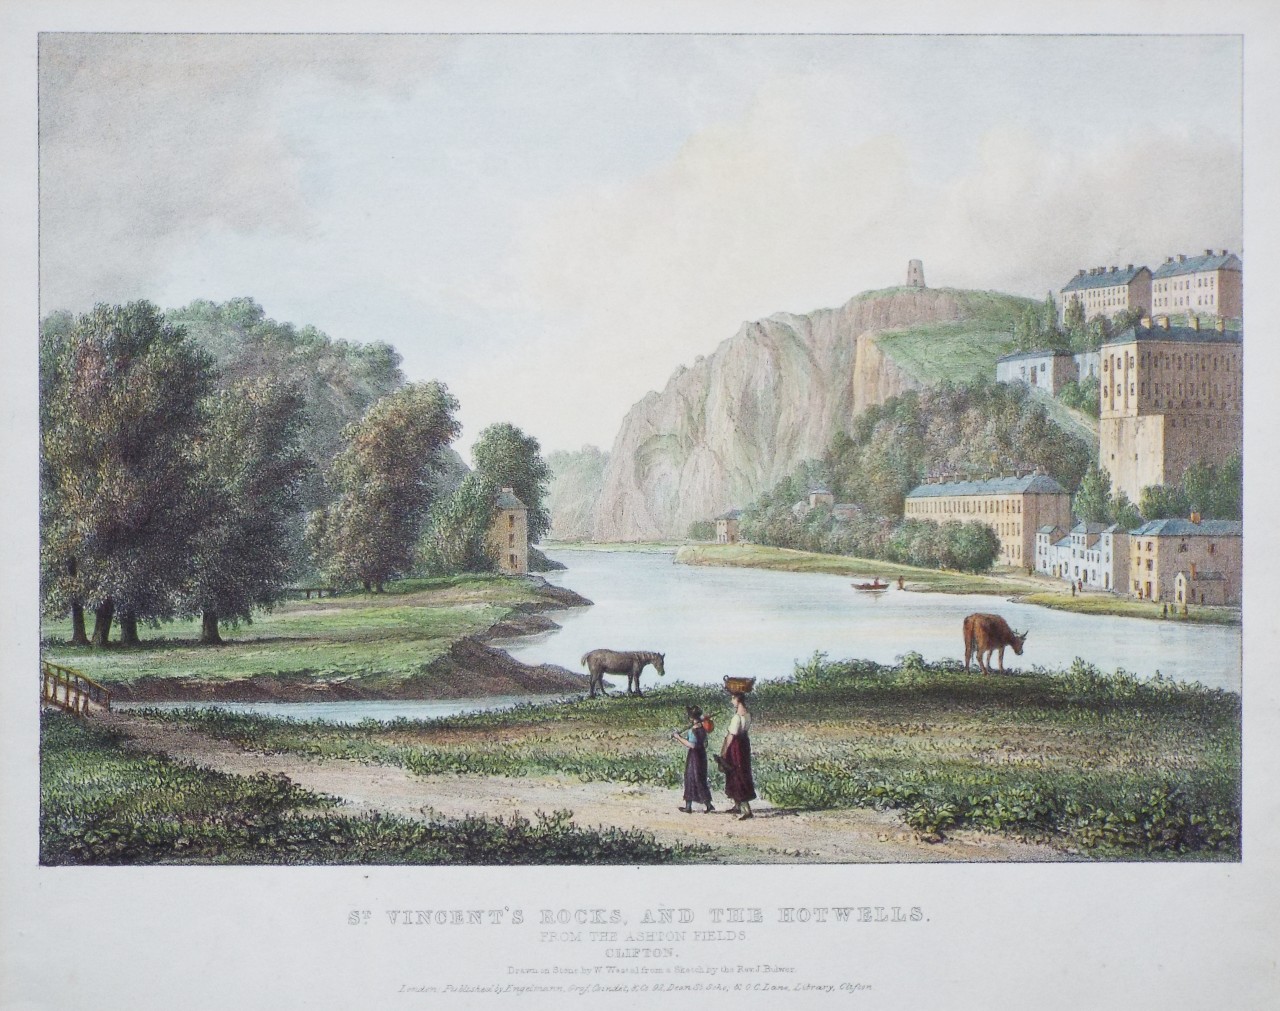 Lithograph - St. Vincent's Rocks, and the Hotwells. From the Ashton Fields Clifton.